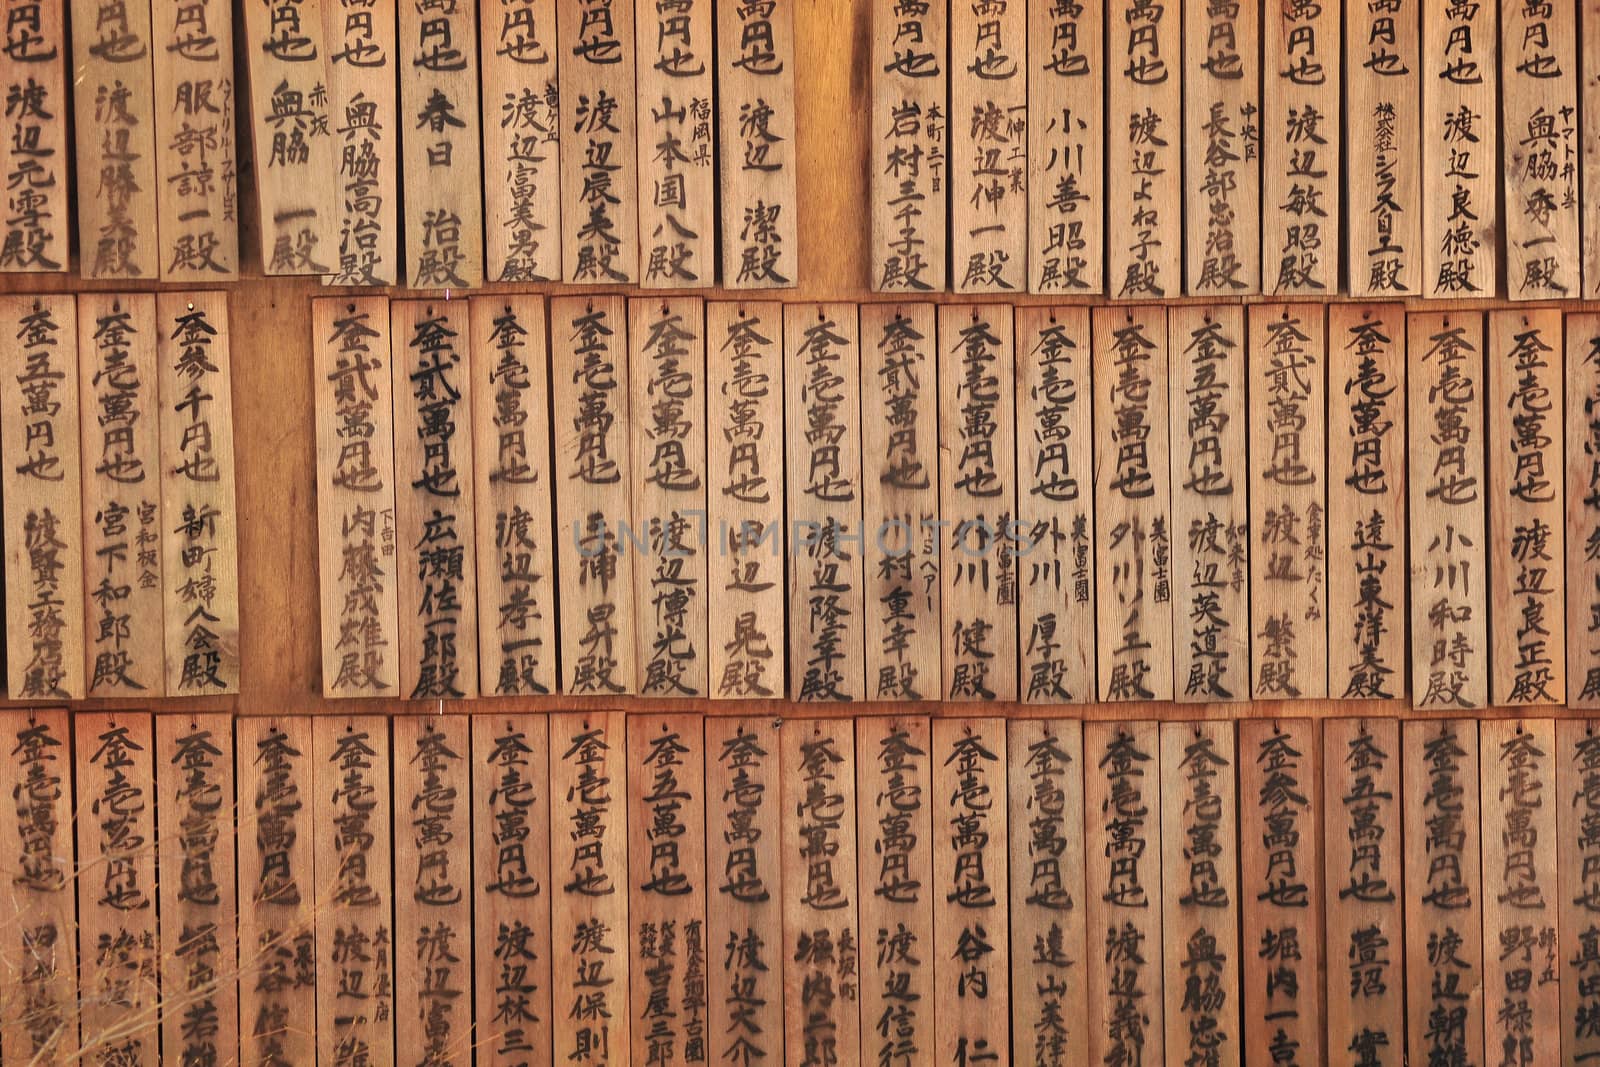 japanese written tag in a local temple